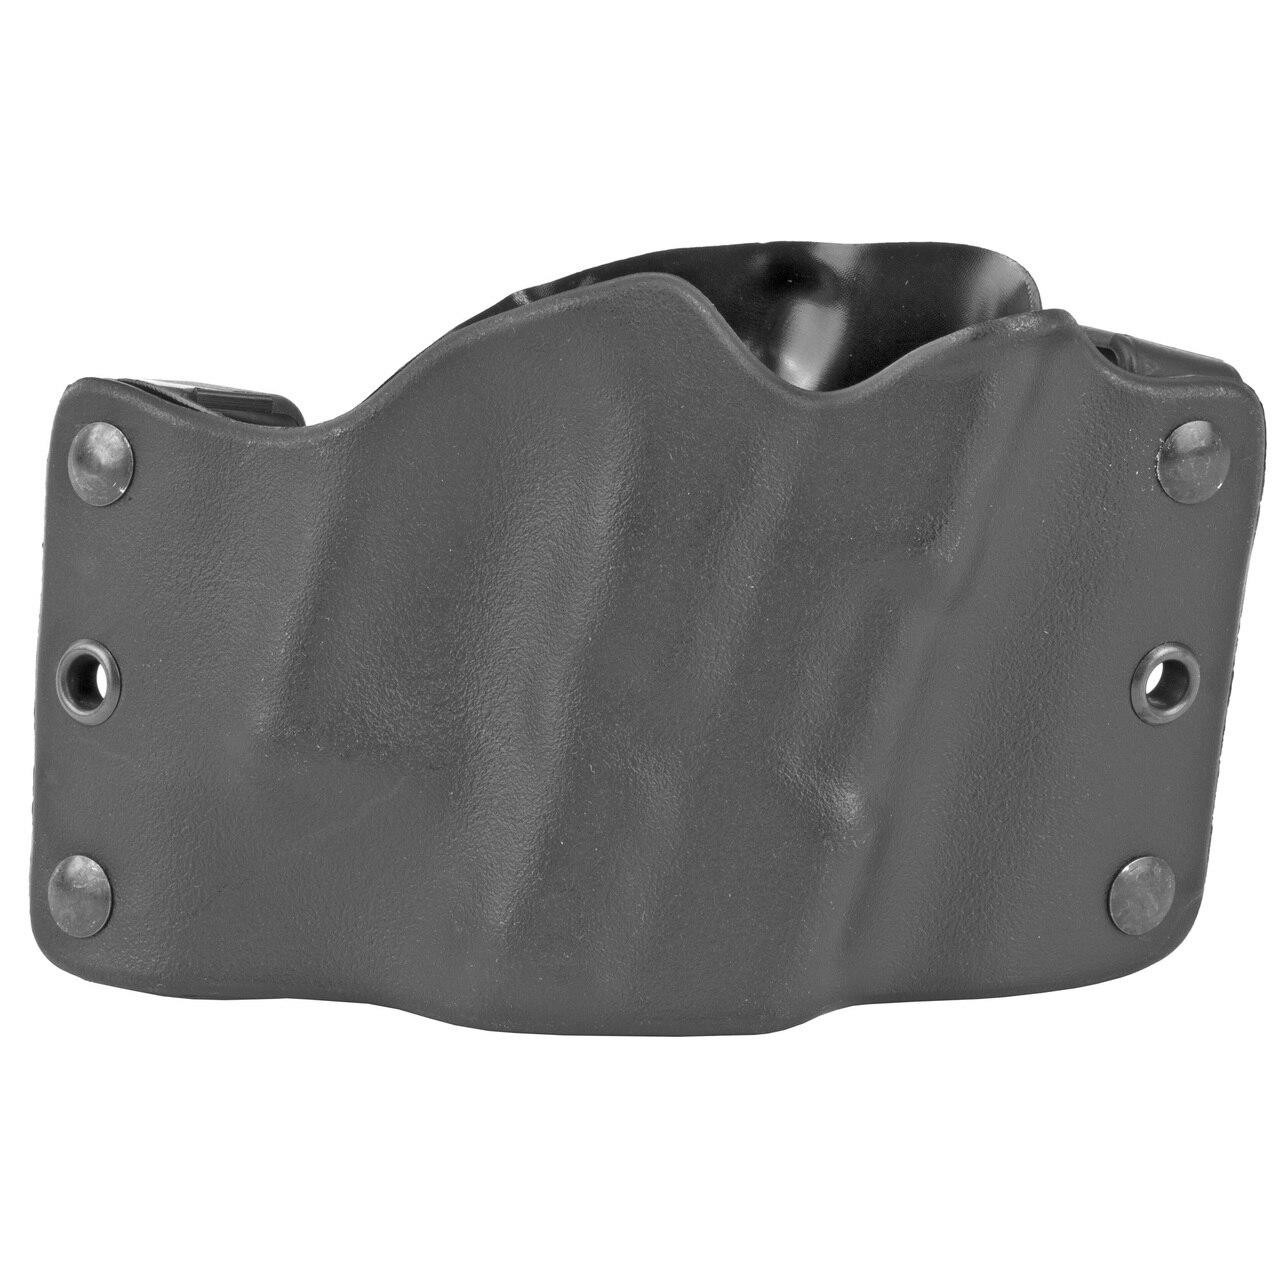 Stealth Operator Holster Stealth Operator Compact Blk Rh 611401500503